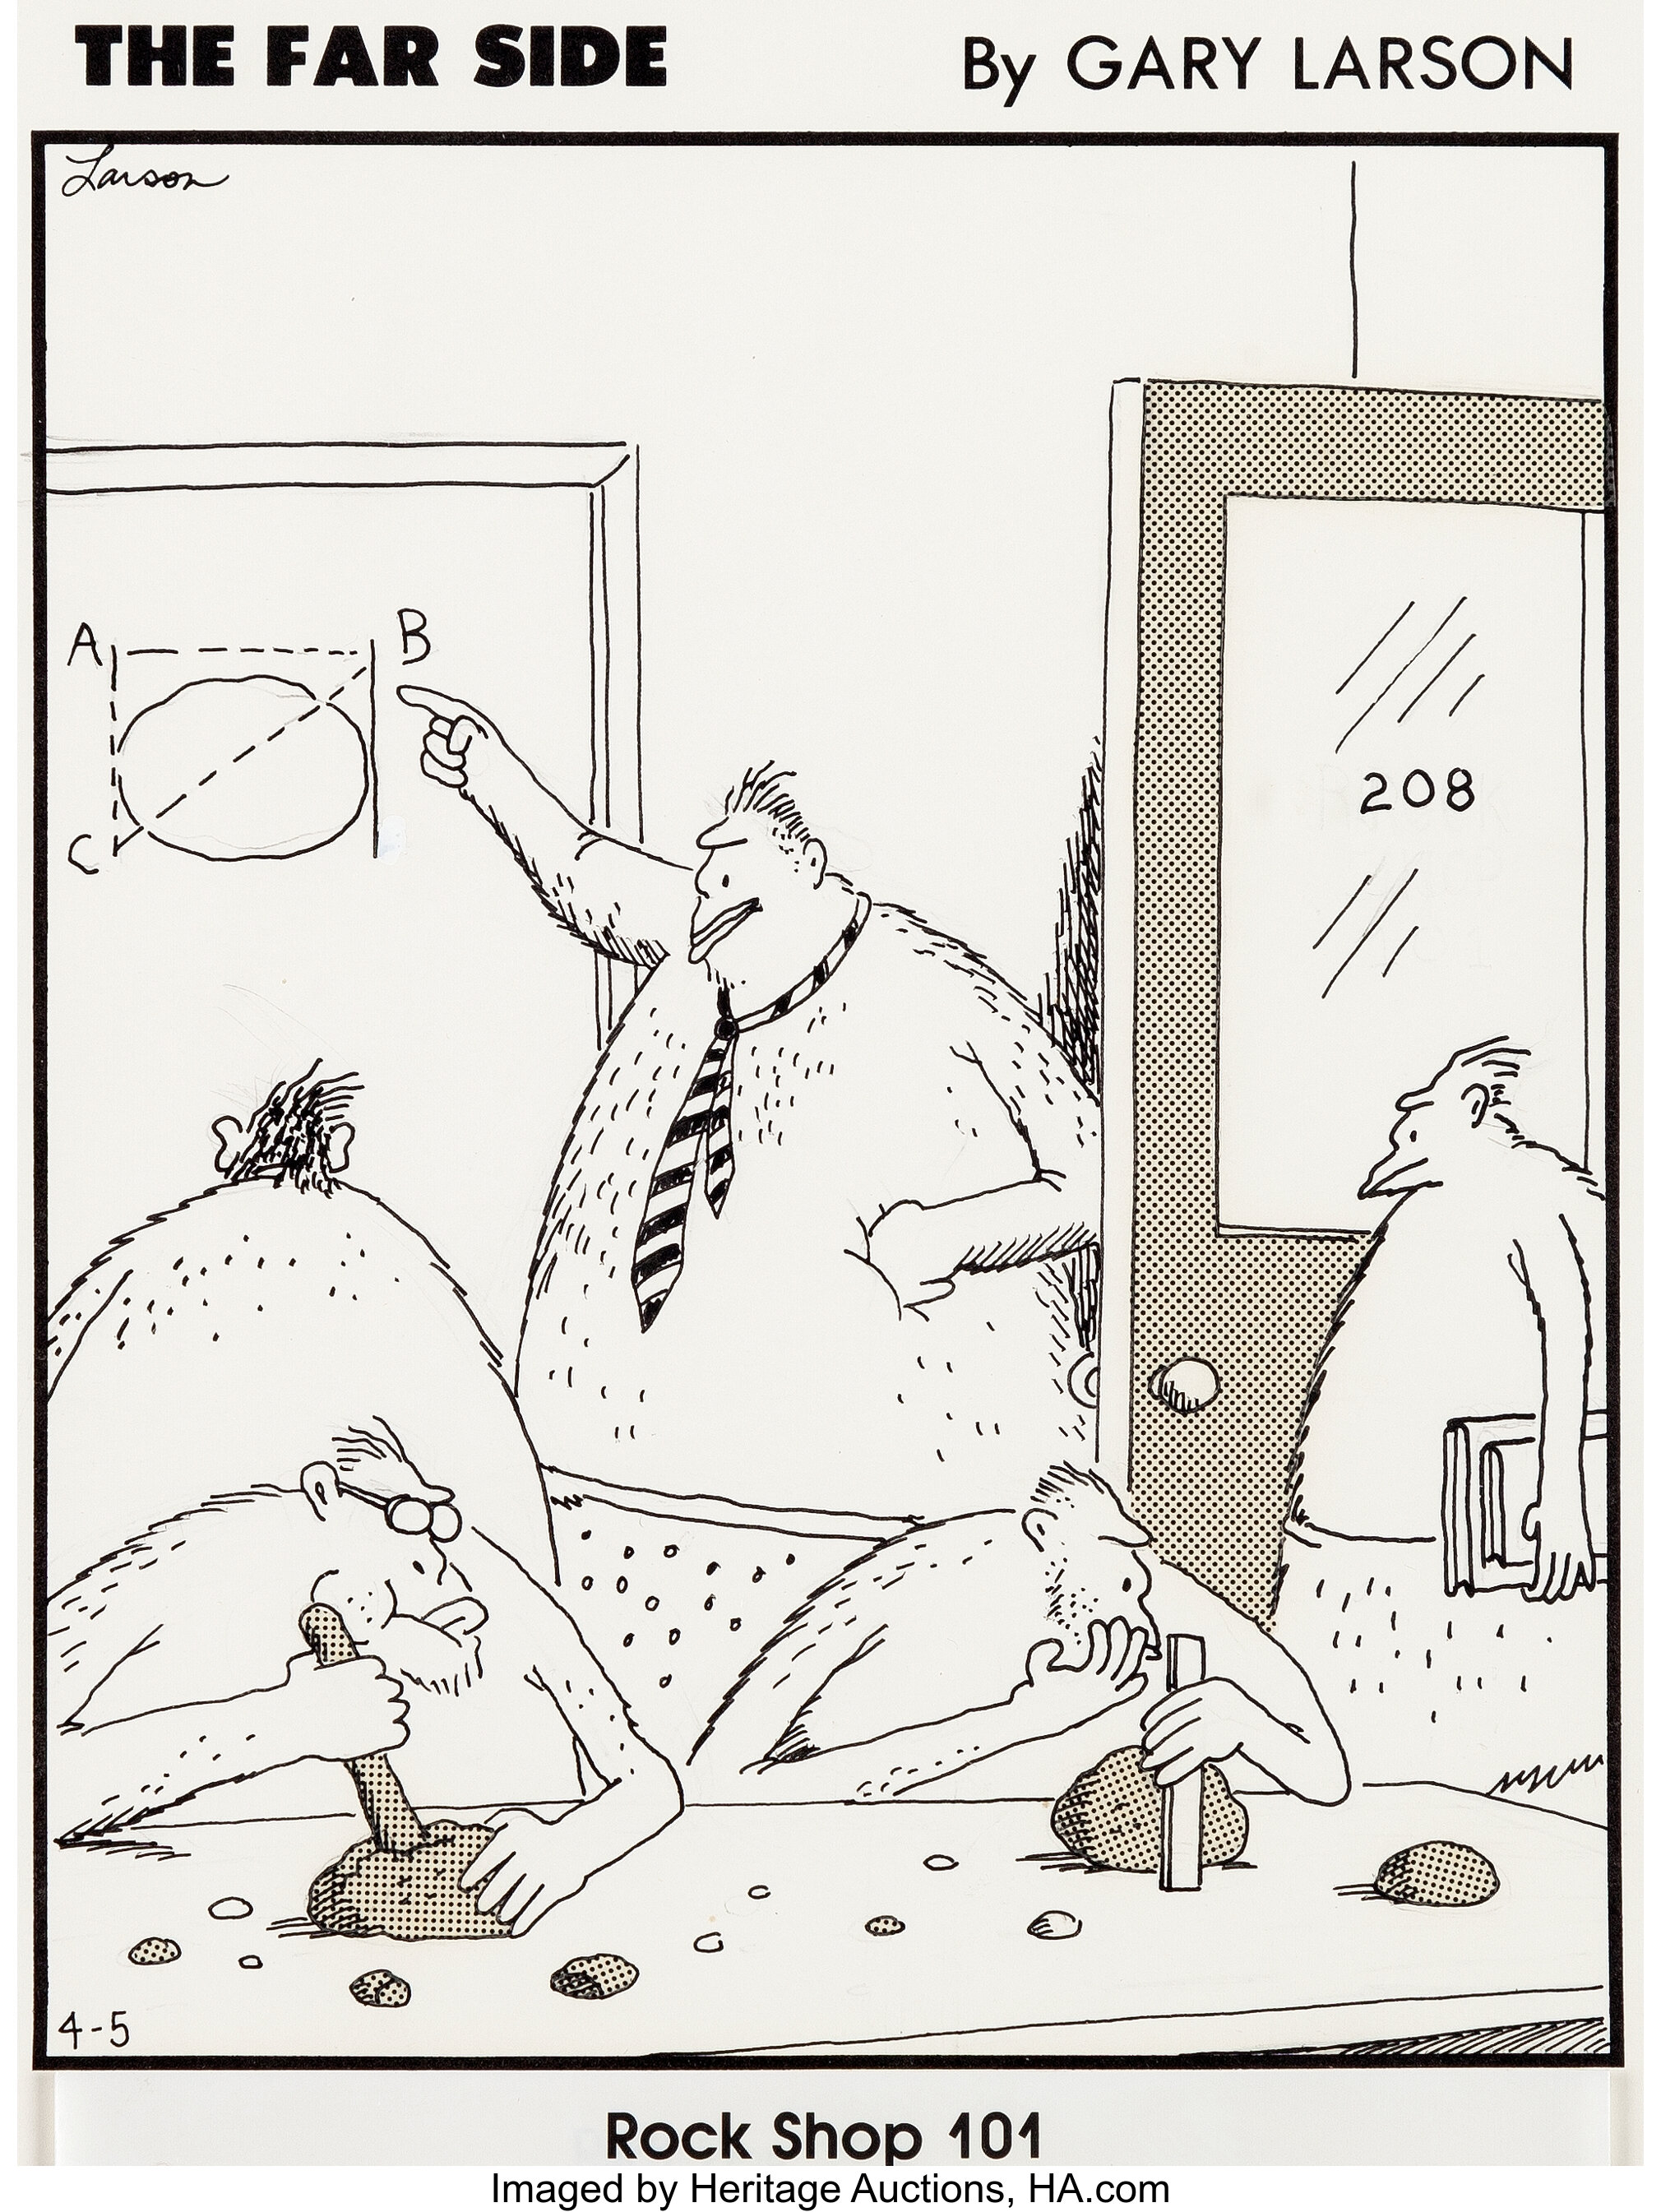 Gary Larson The Far Side Daily Comic Strip Original Art Dated Lot 92146 Heritage Auctions